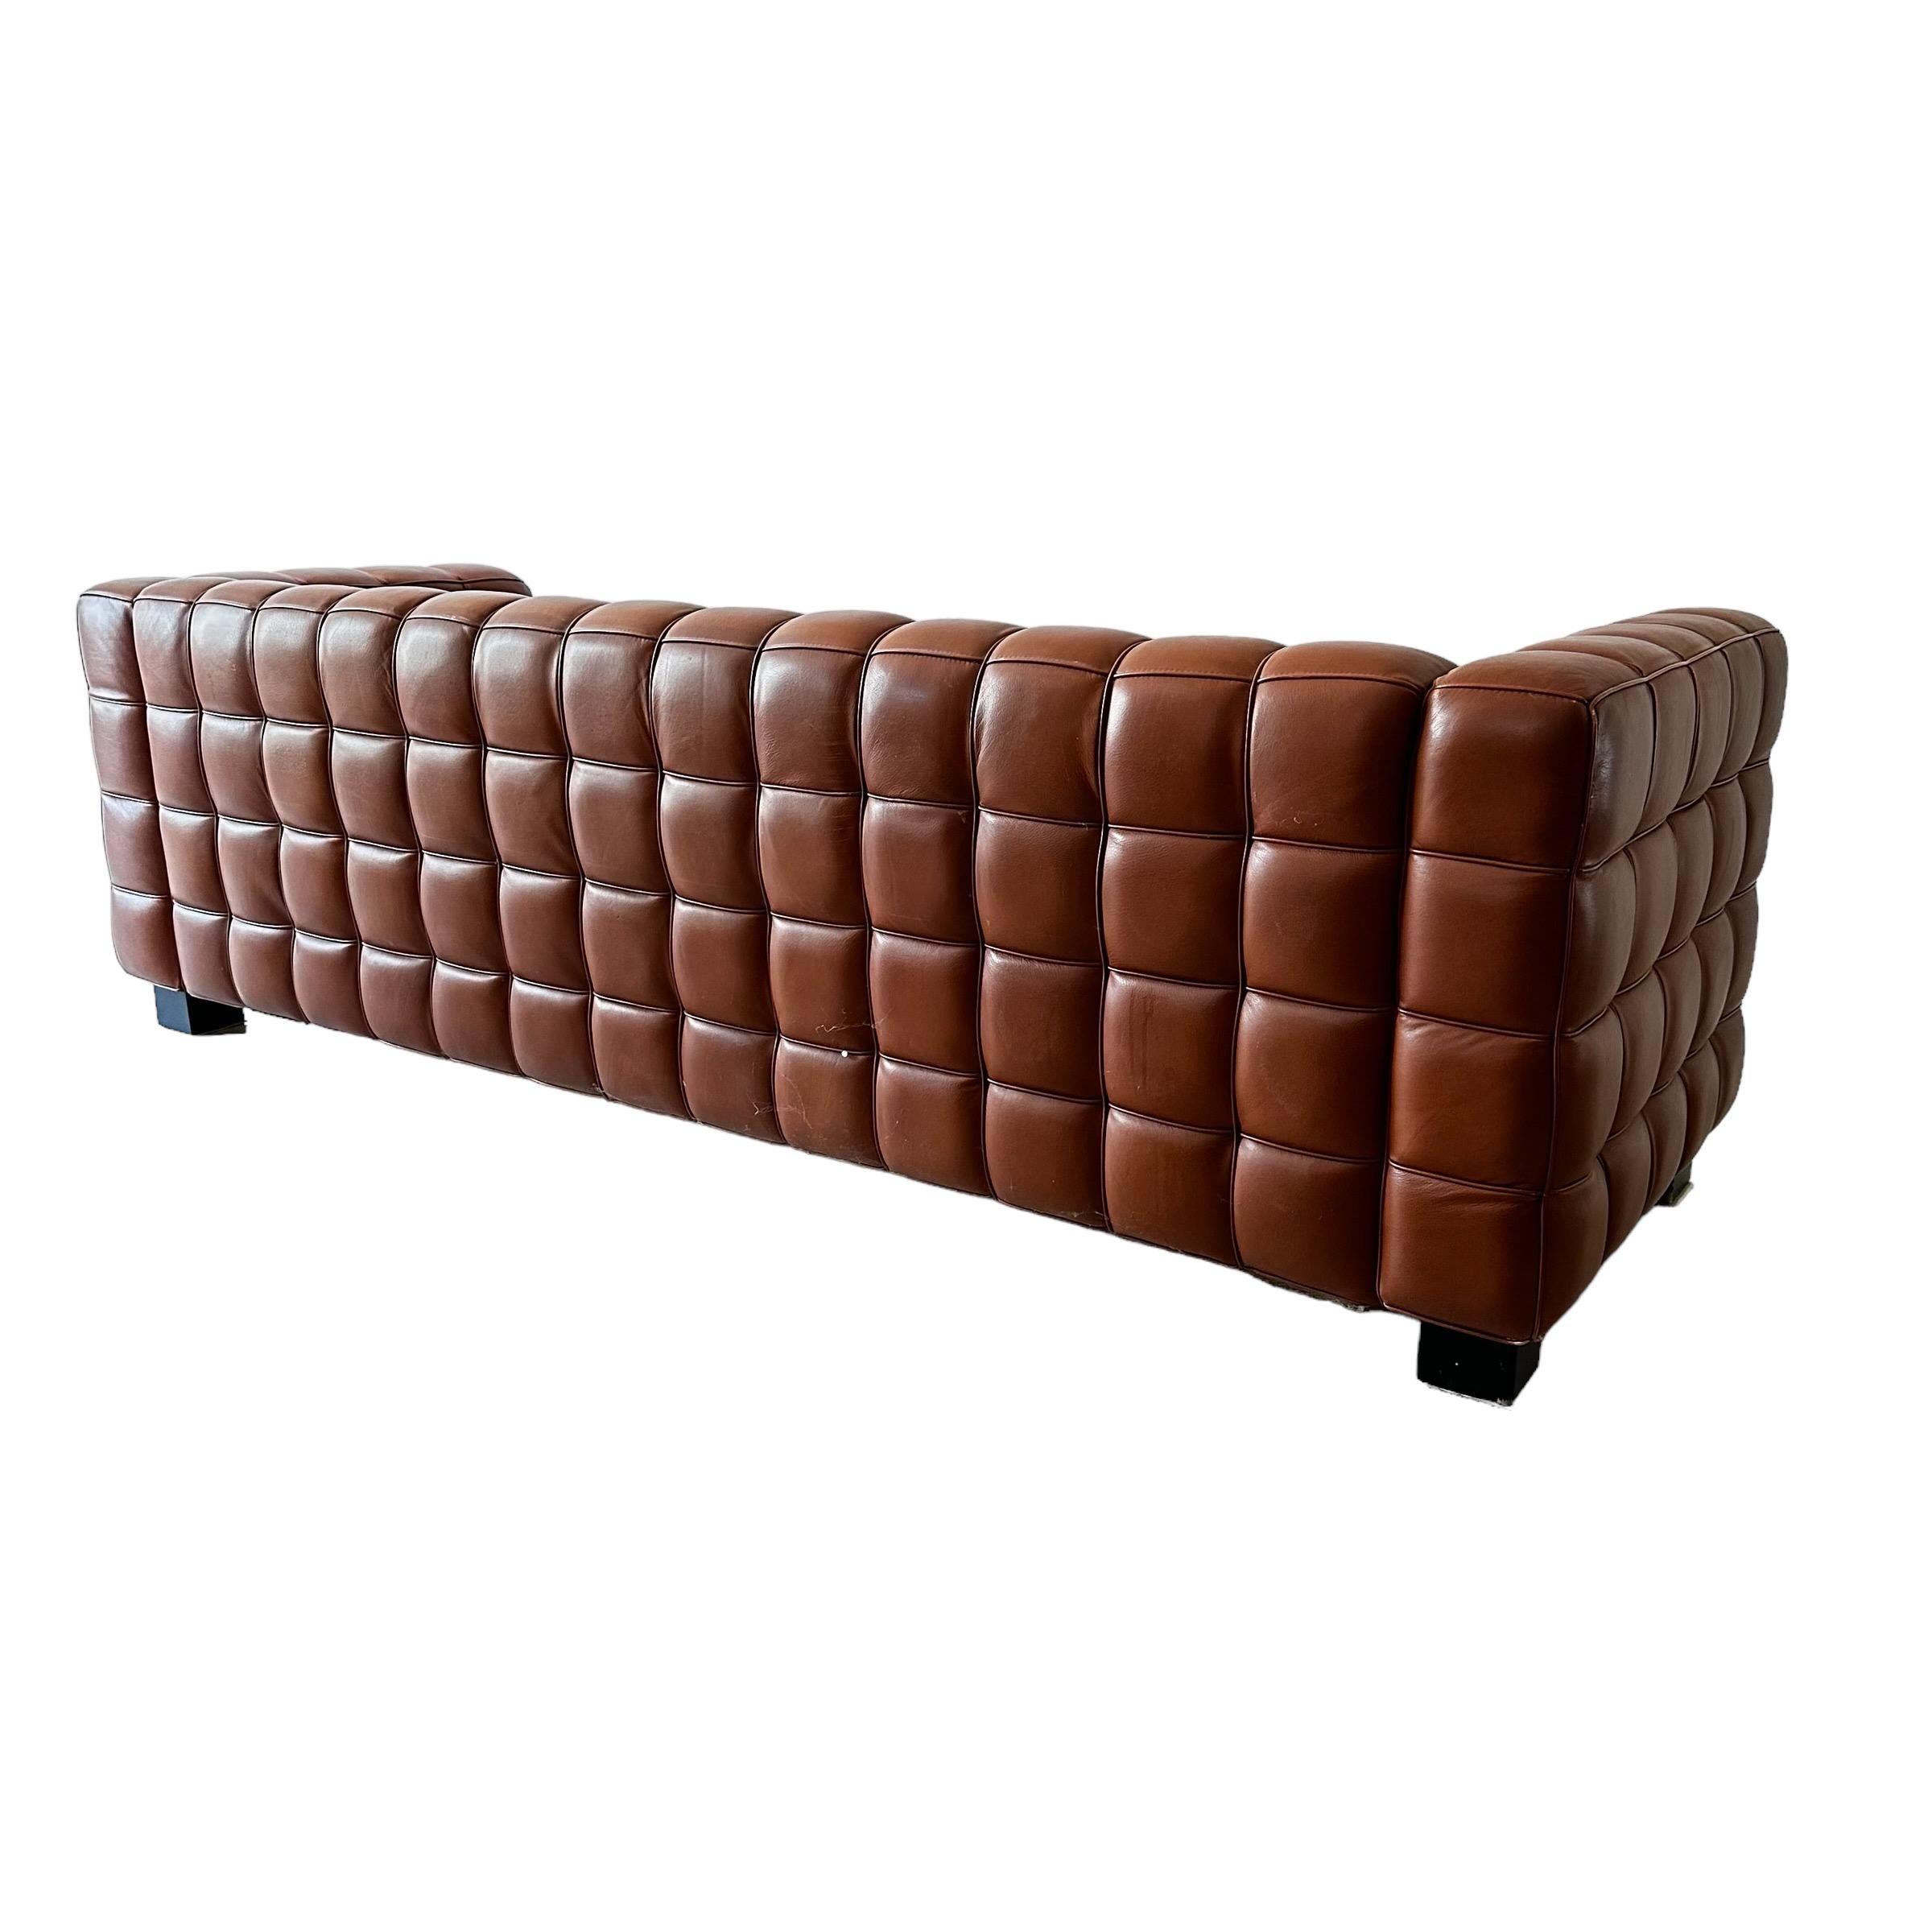 Josef Hoffmann Kubus Sofa in Patinated Original Cognac Leather by Wittmann In Good Condition For Sale In Vienna, AT